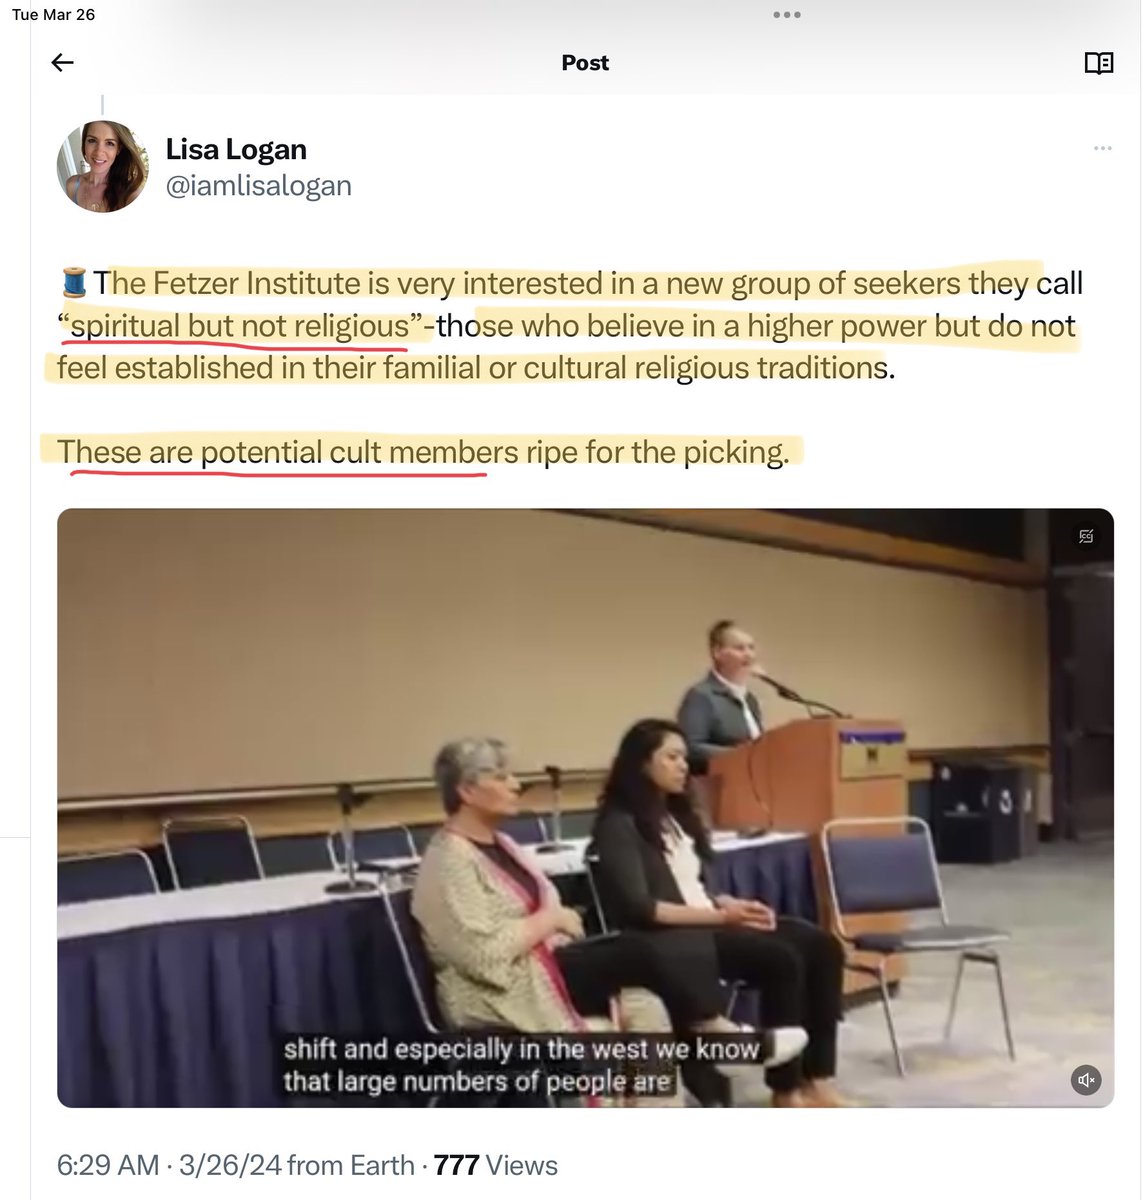 @iamlisalogan @FetzerInstitute This is the post that concerned me — the targeting lends itself to “othering” and when that happens it’s easier to attach other labels like “cult,” etc. 

Once the labeling starts, the sorting begins, and then it’s a hop skip and a jump to mandatory religion or ex-communication.